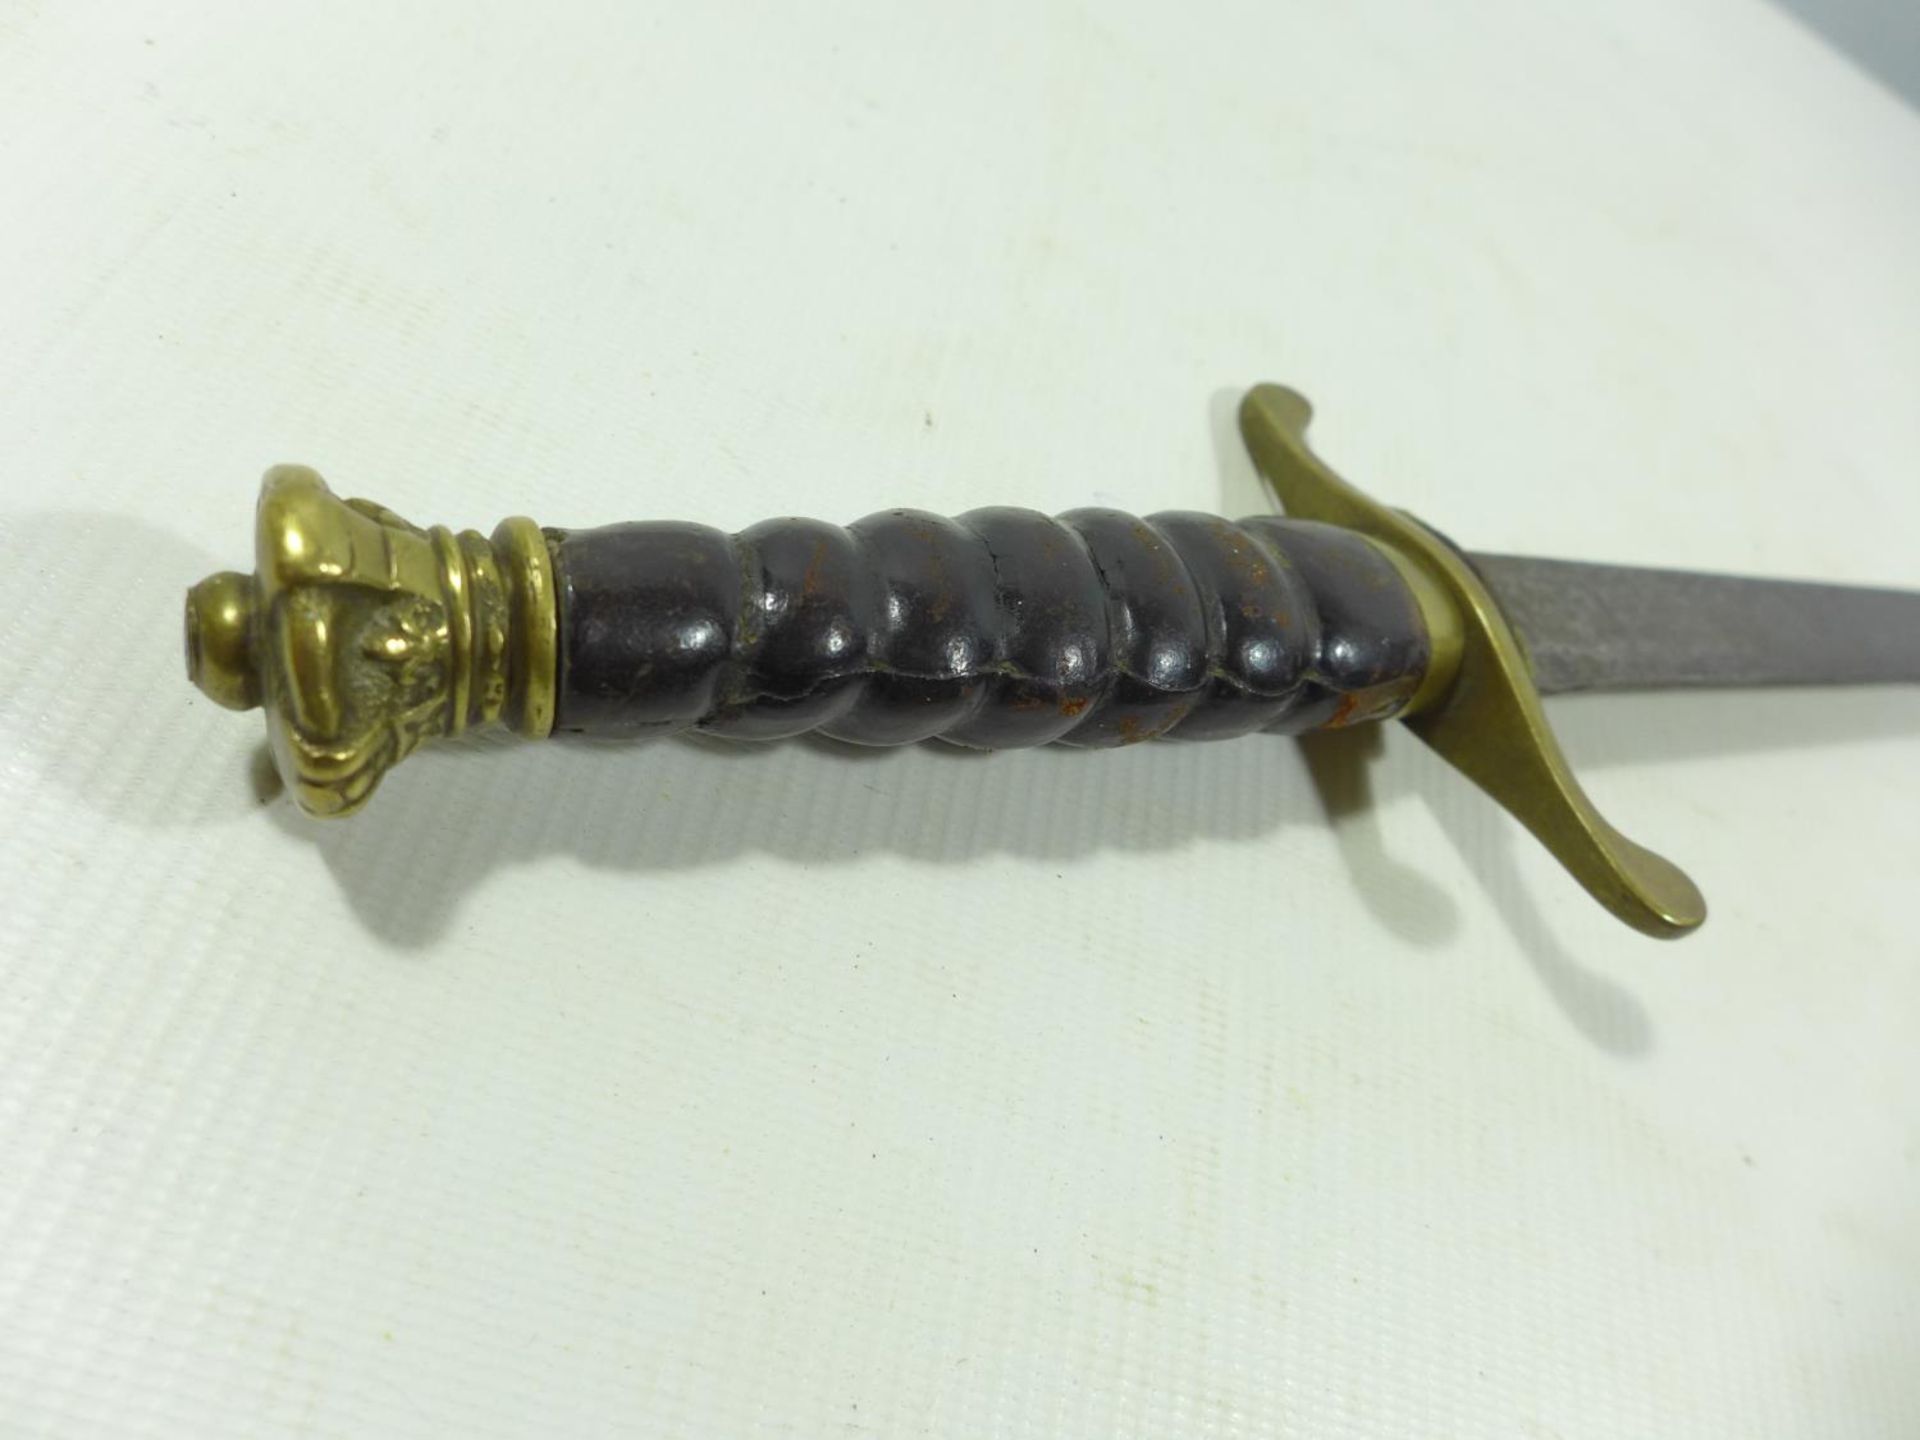 A 19TH CENTURY SHORT SWORD, 46CM BLADE, BRASS MOUNTS, LEATHER GRIP - Image 3 of 6